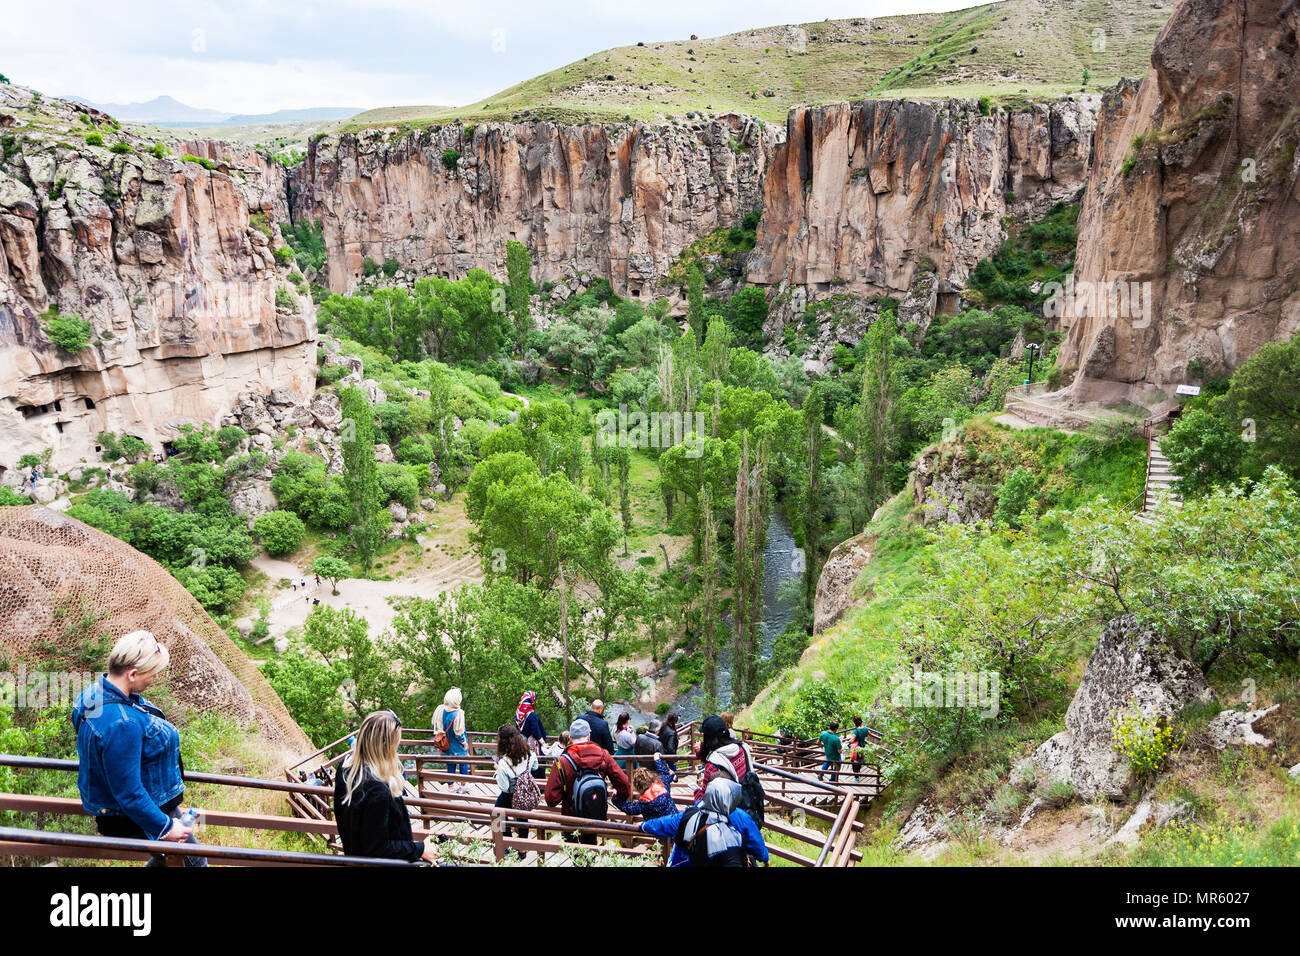 IHLARA VALLEY, TURKEY - MAY 6, 2018: people walk to Ihlara Valley in Aksaray Province. Ihlara Valley is 16 km long gorge, it is the most famous valley Stock Photo